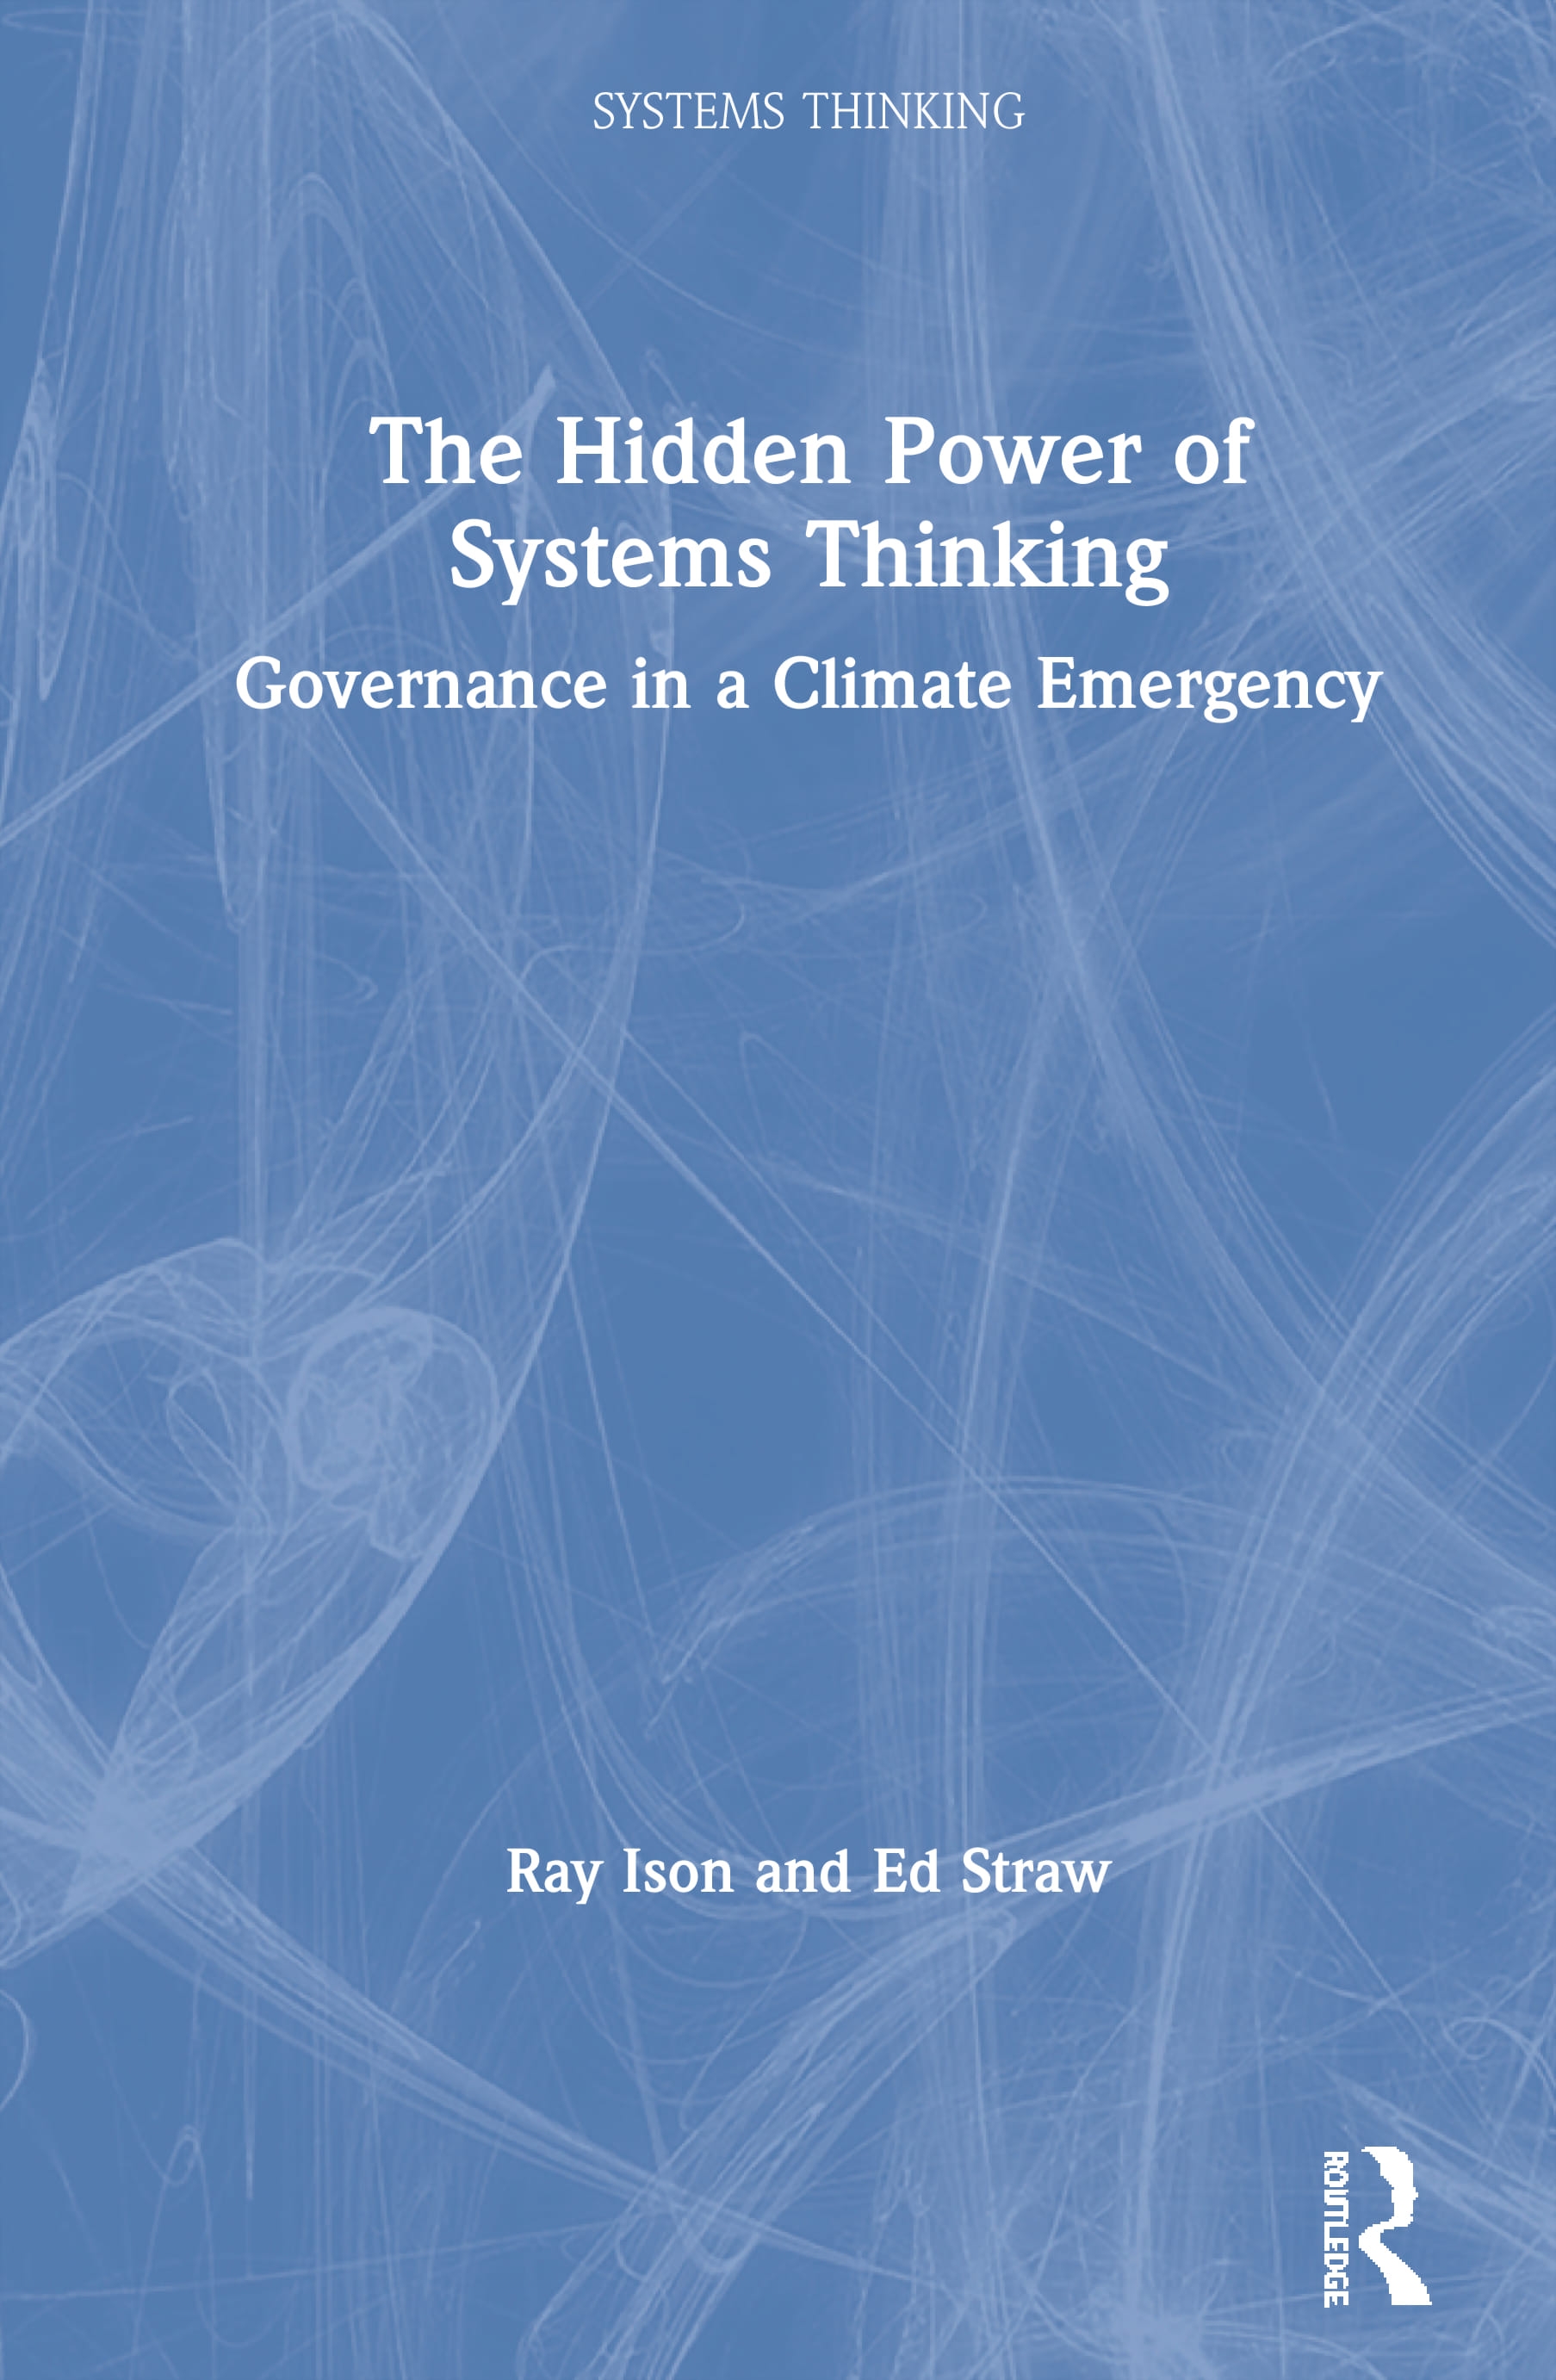 The Hidden Power of Systems Thinking: Governance in a Climate Emergency